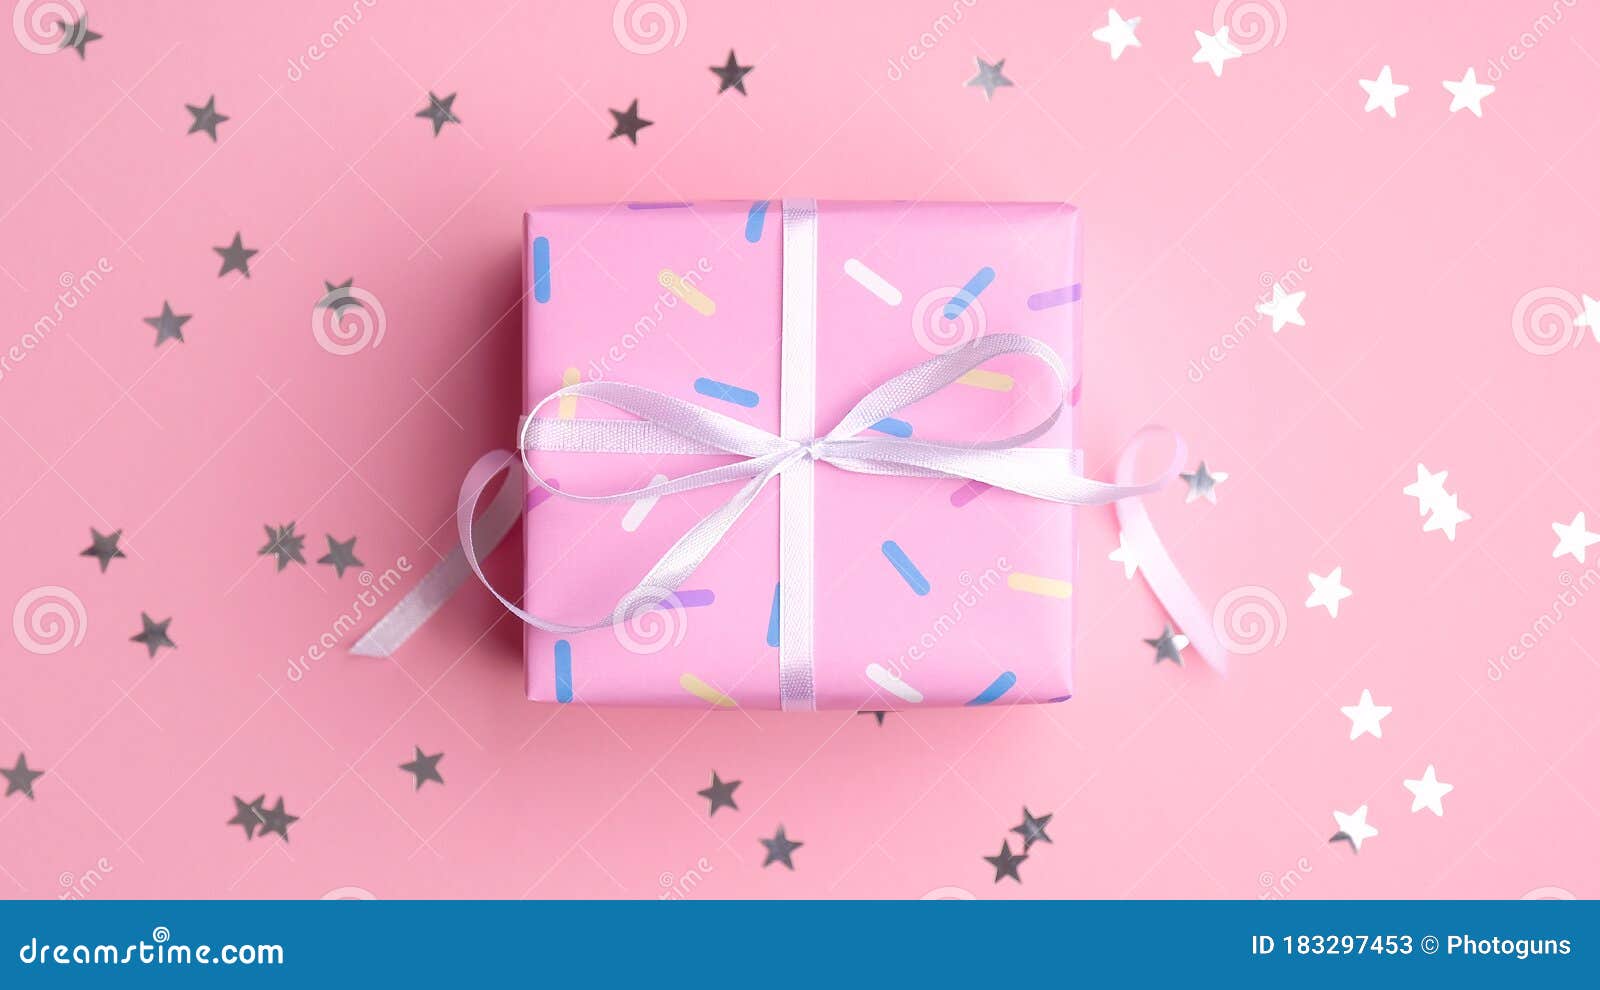 Bright Pink Gift Box With Silver Sparkle Confetti Stars On